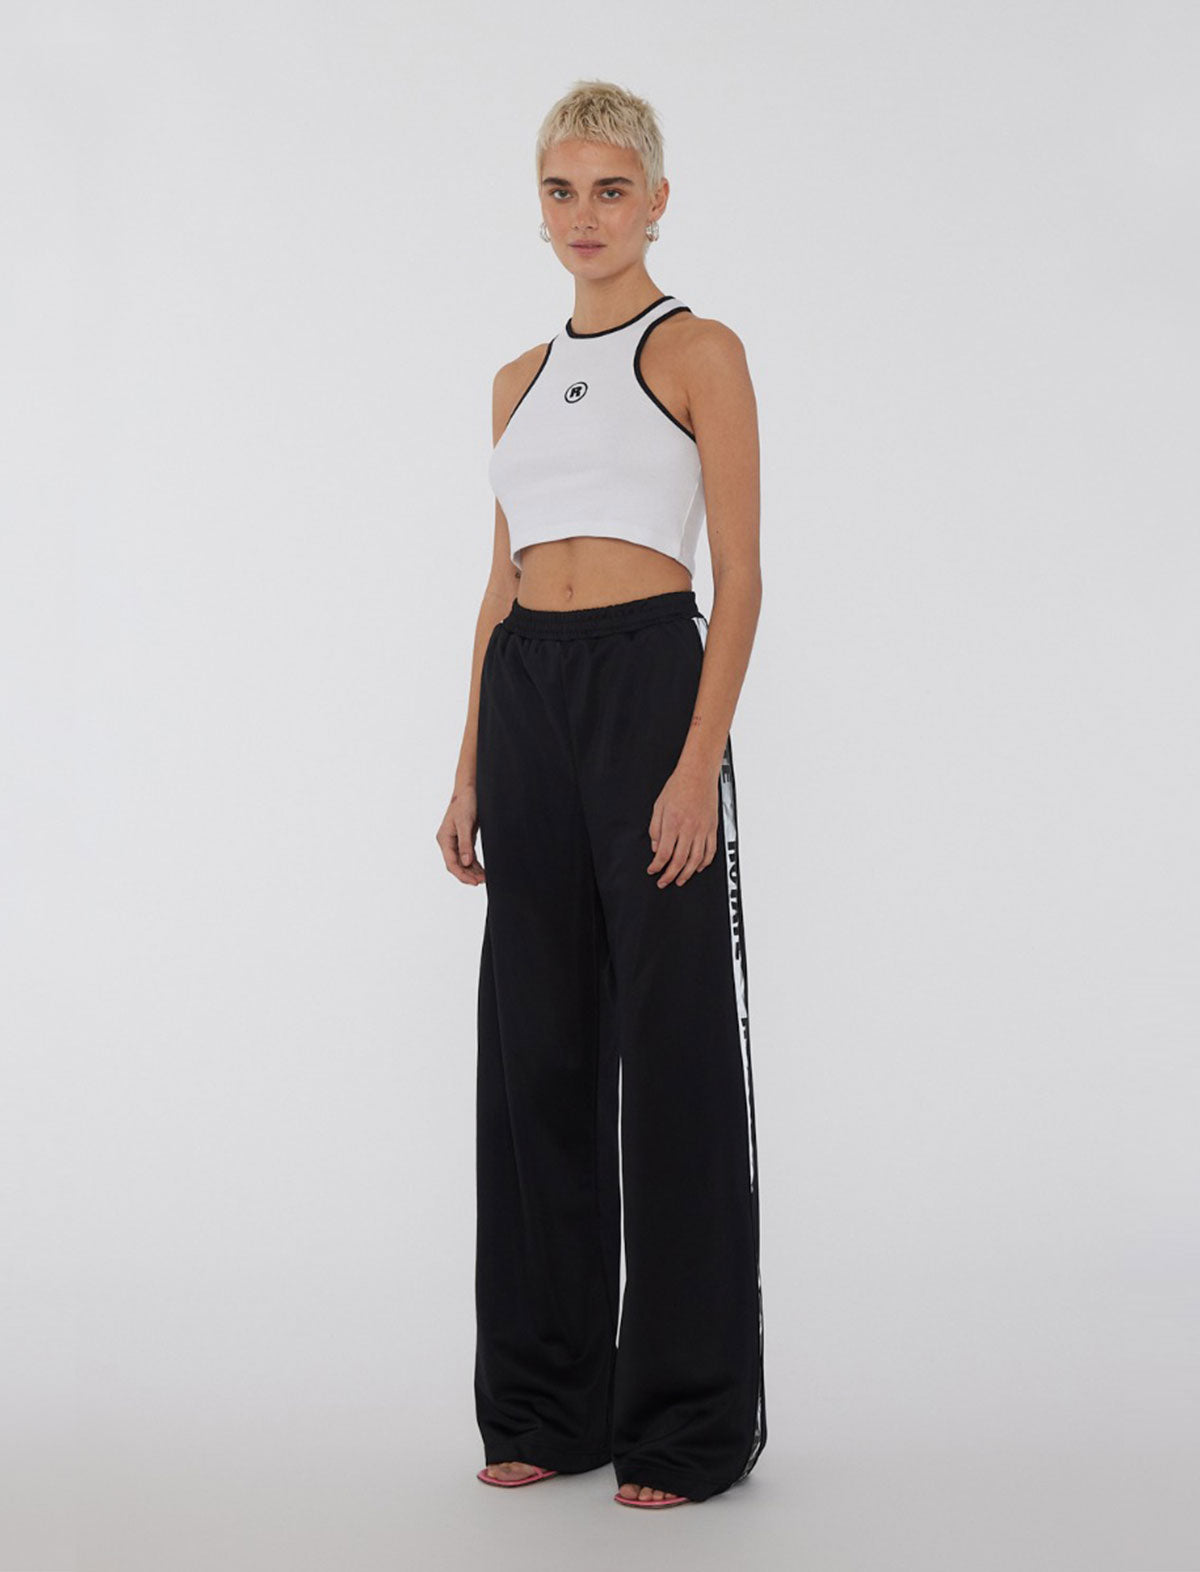 ROTATE SUNDAY 6 Long Stretch Track Pants in Black